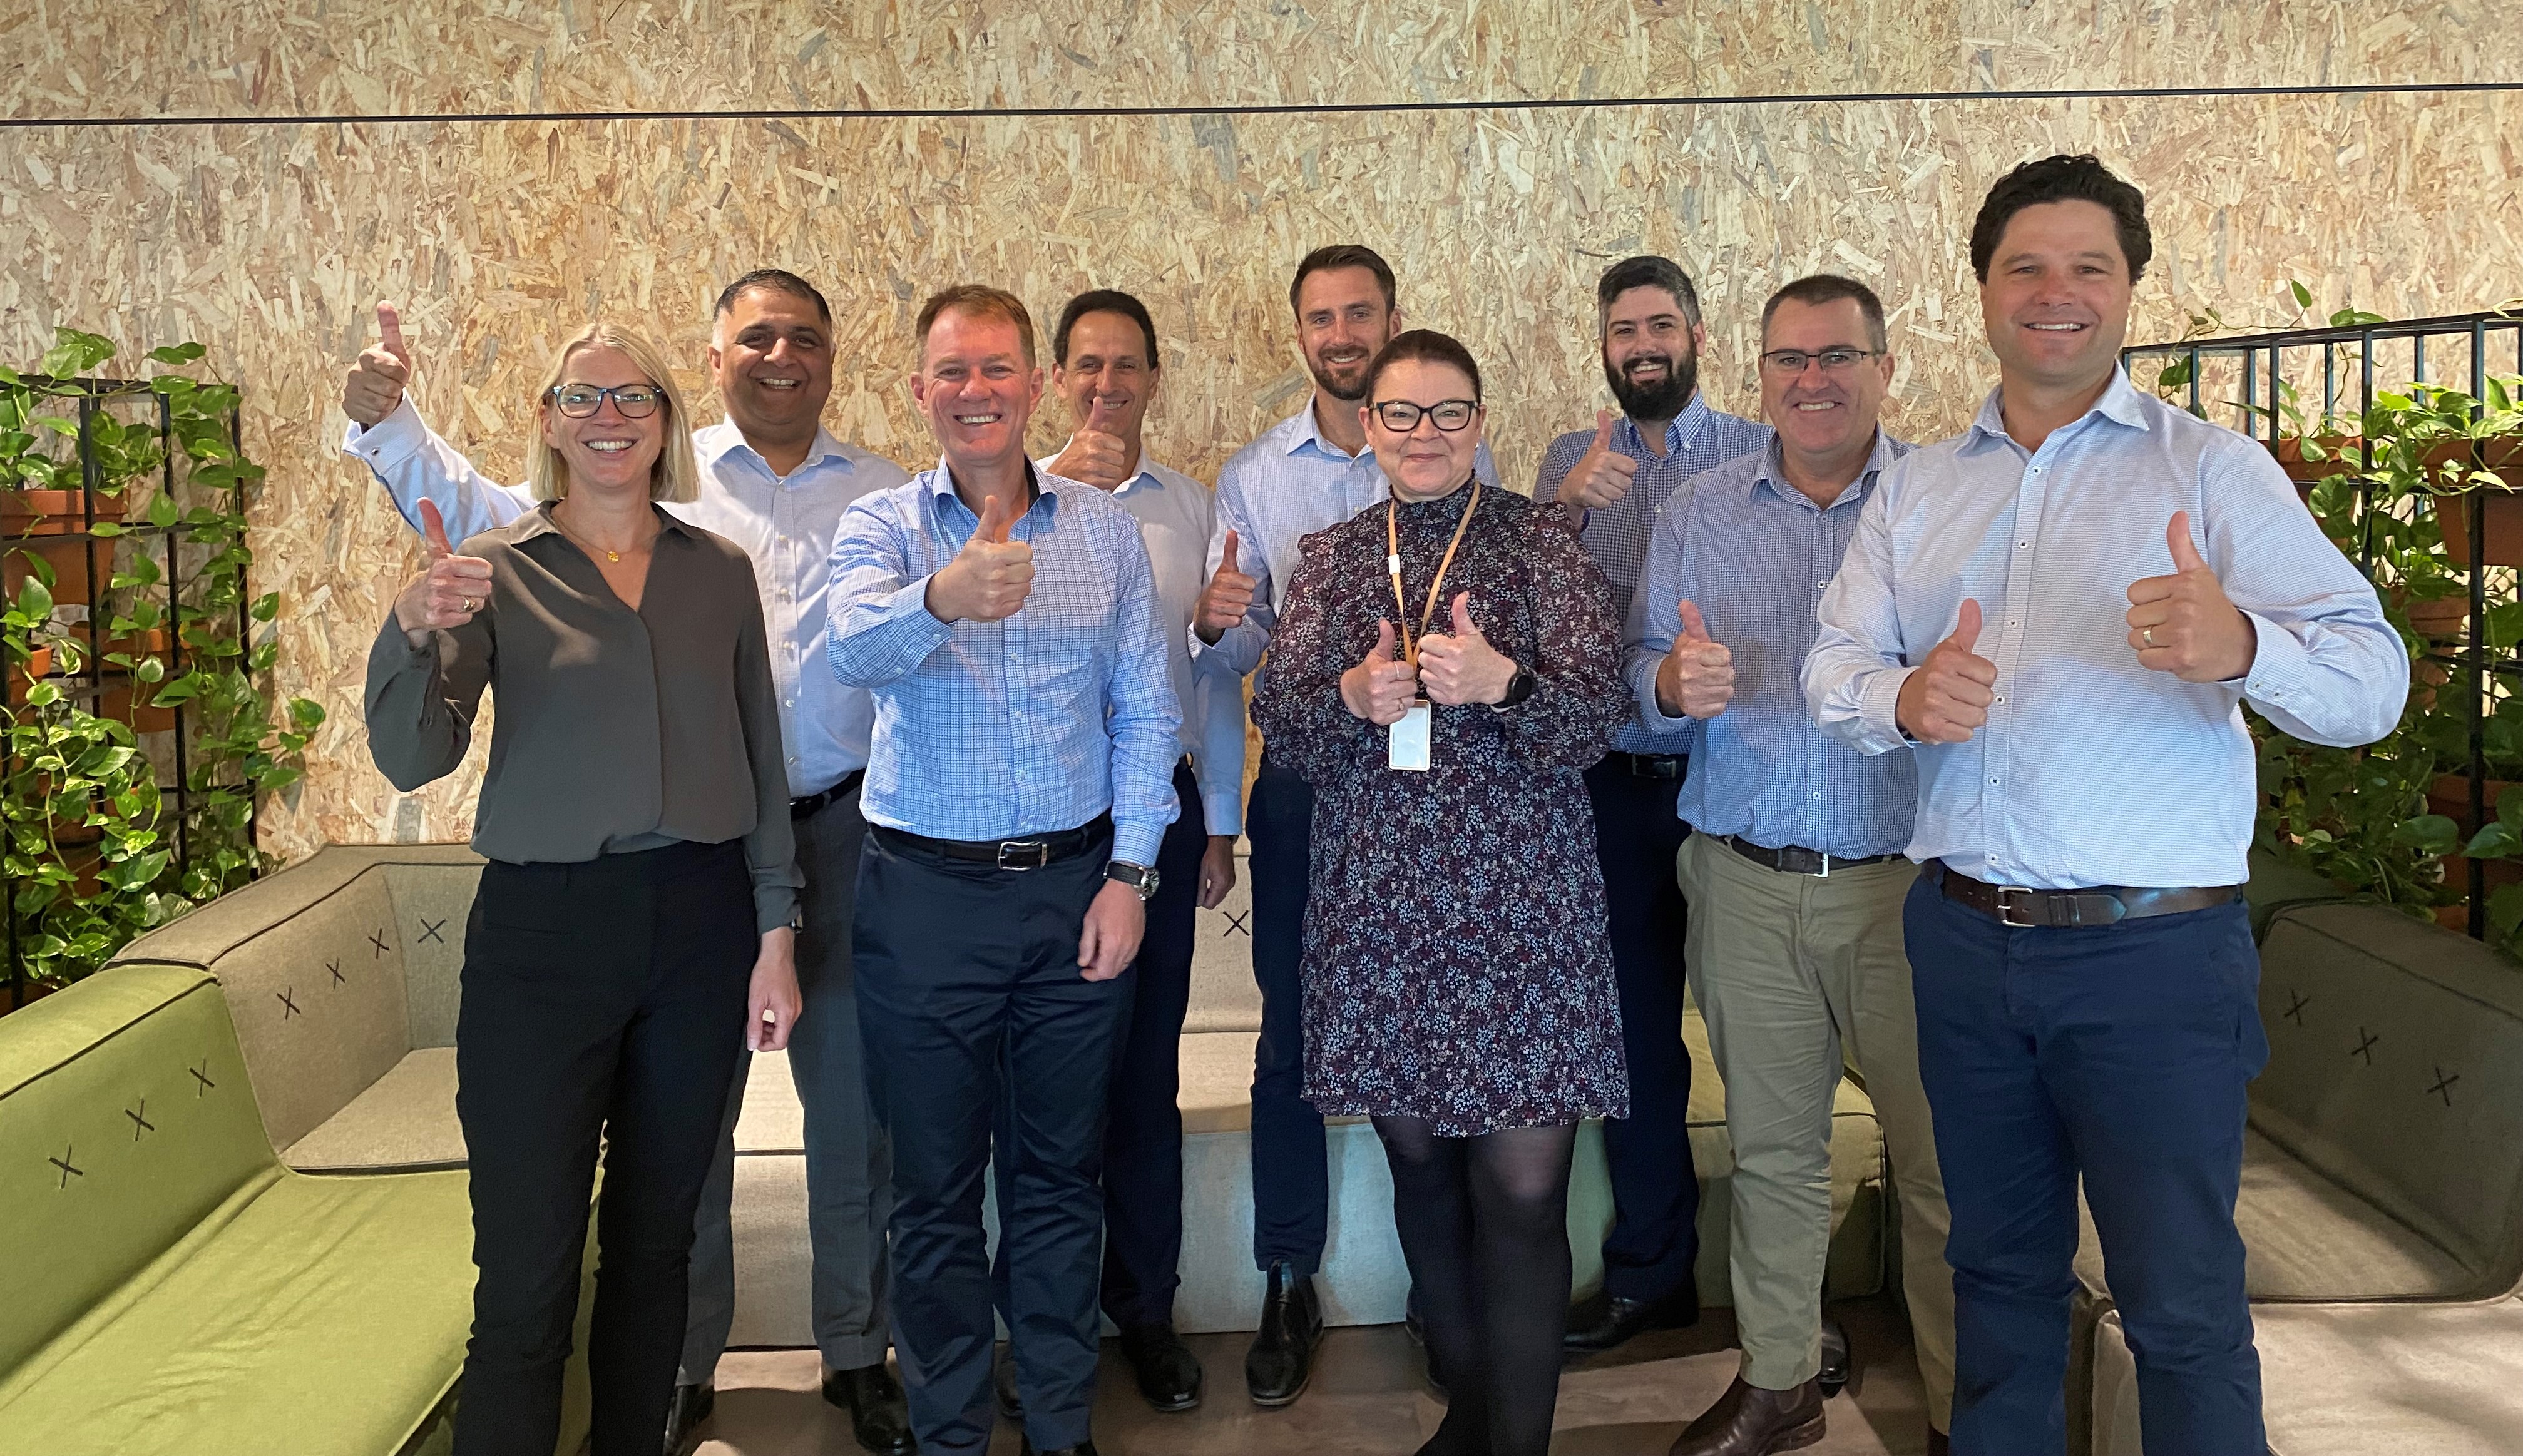 The CBH Group has implemented an incentive scheme to encourage employees to get fully vaccinated against COVID-19 ahead of this year’s bumper harvest.   